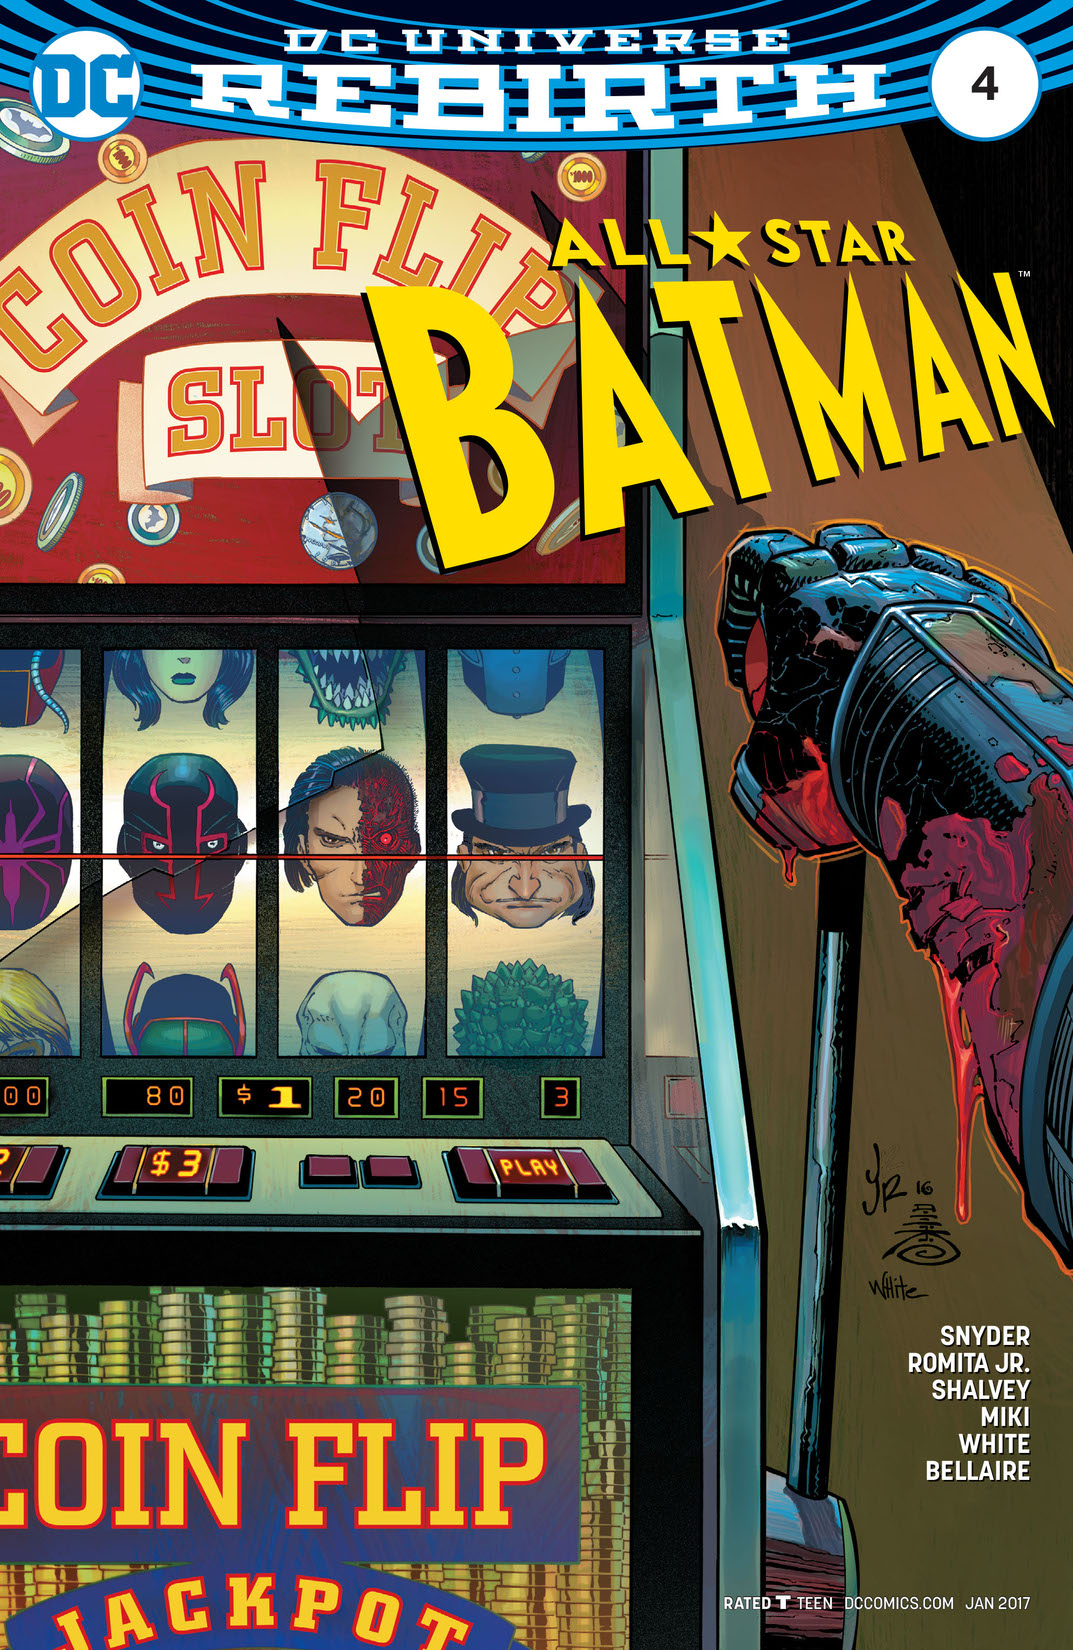 All Star Batman #4 preview images